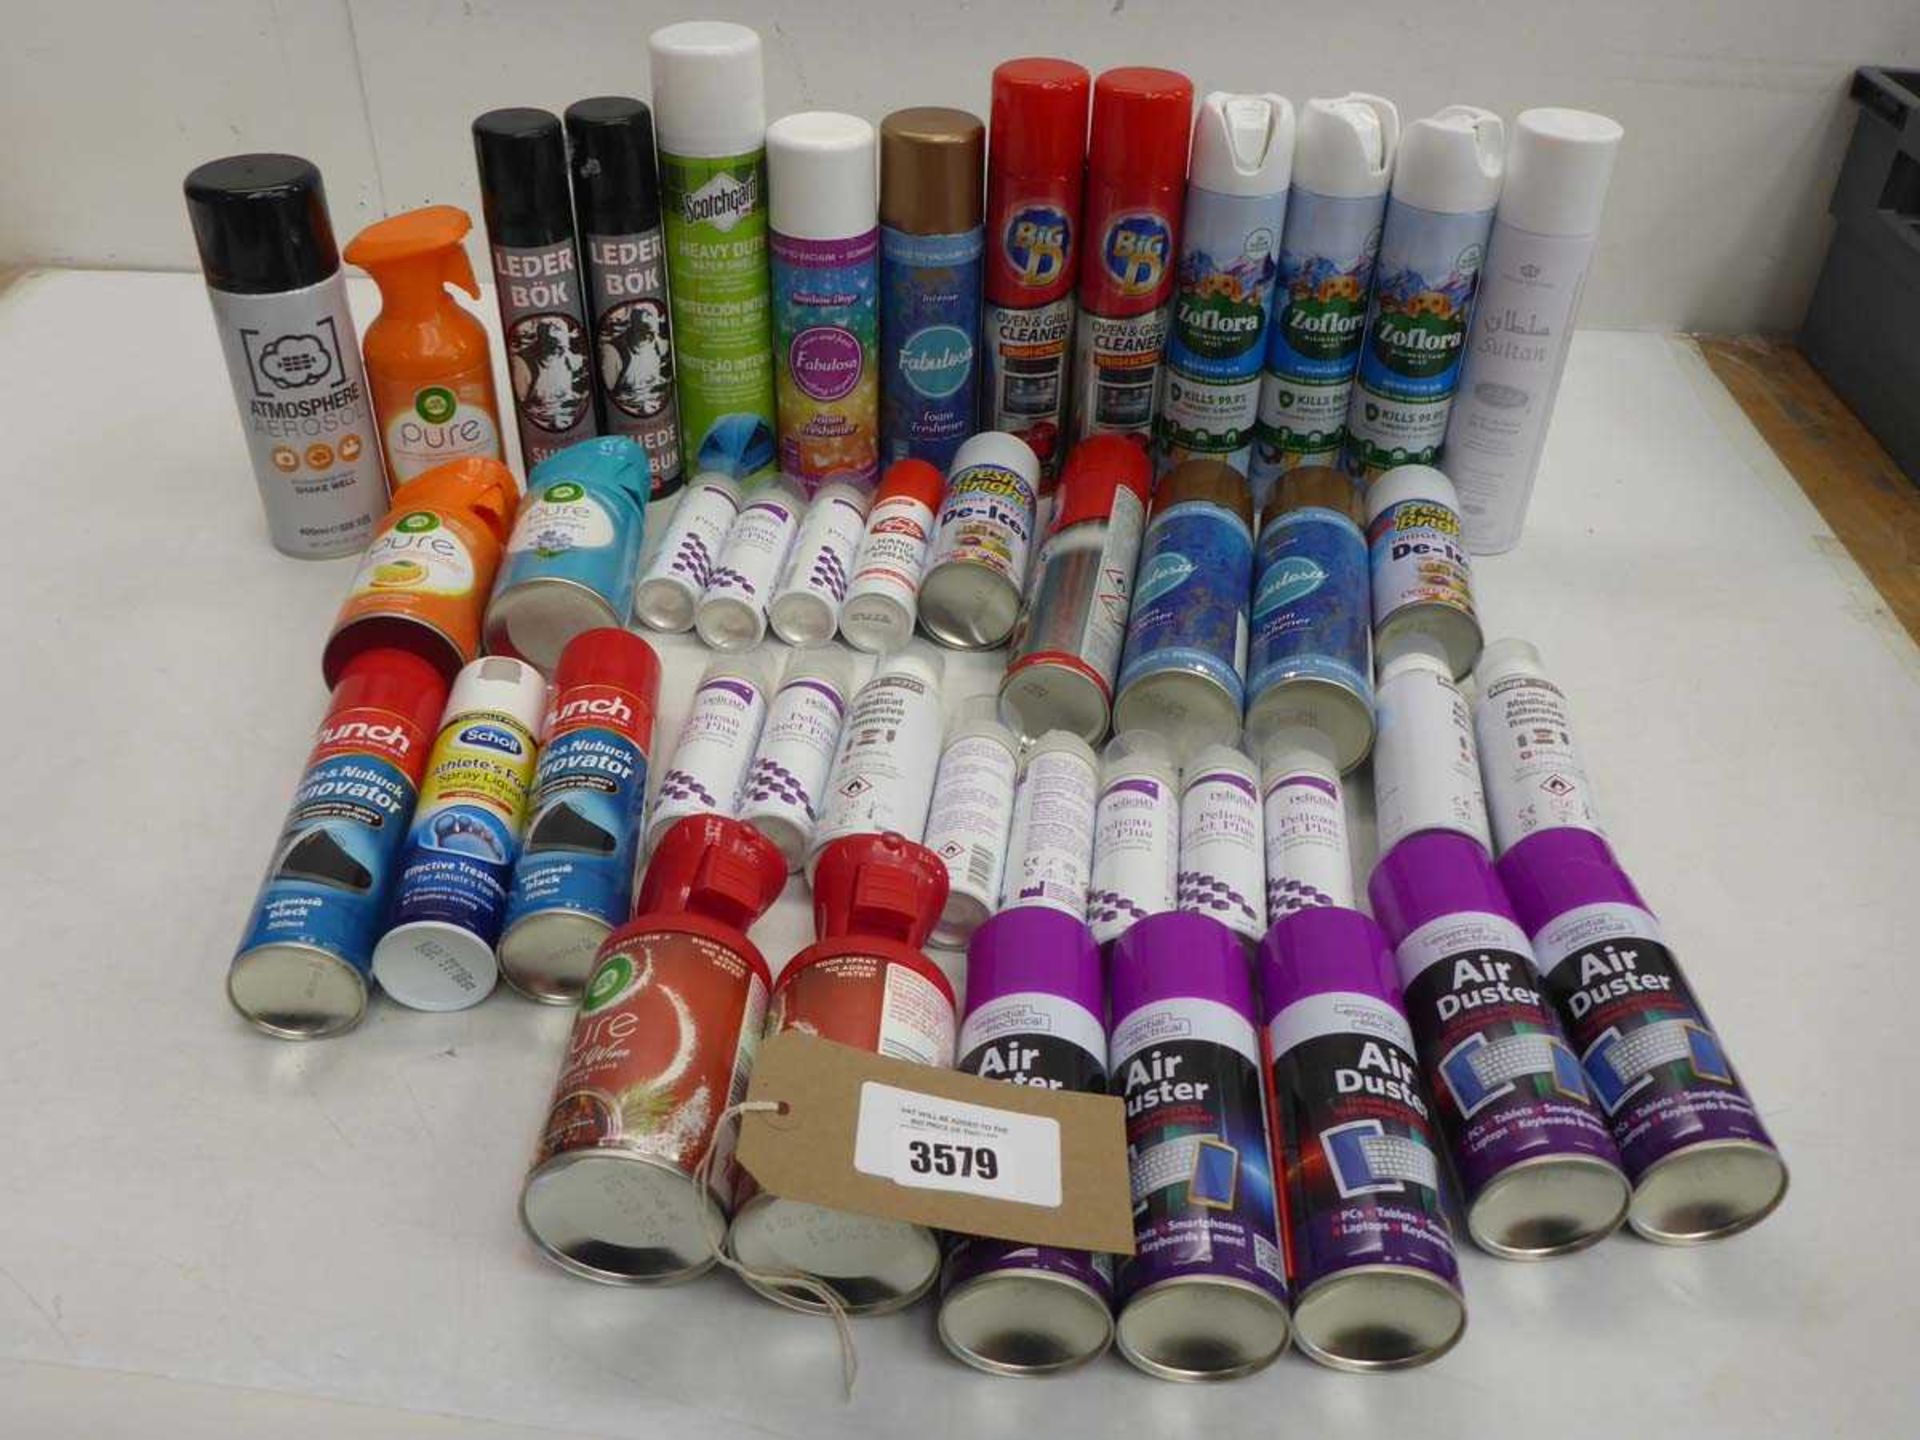 +VAT Air fresheneners, Oven cleaner, Suede care, Air dusters, Non sting barrier film, Atmosphere